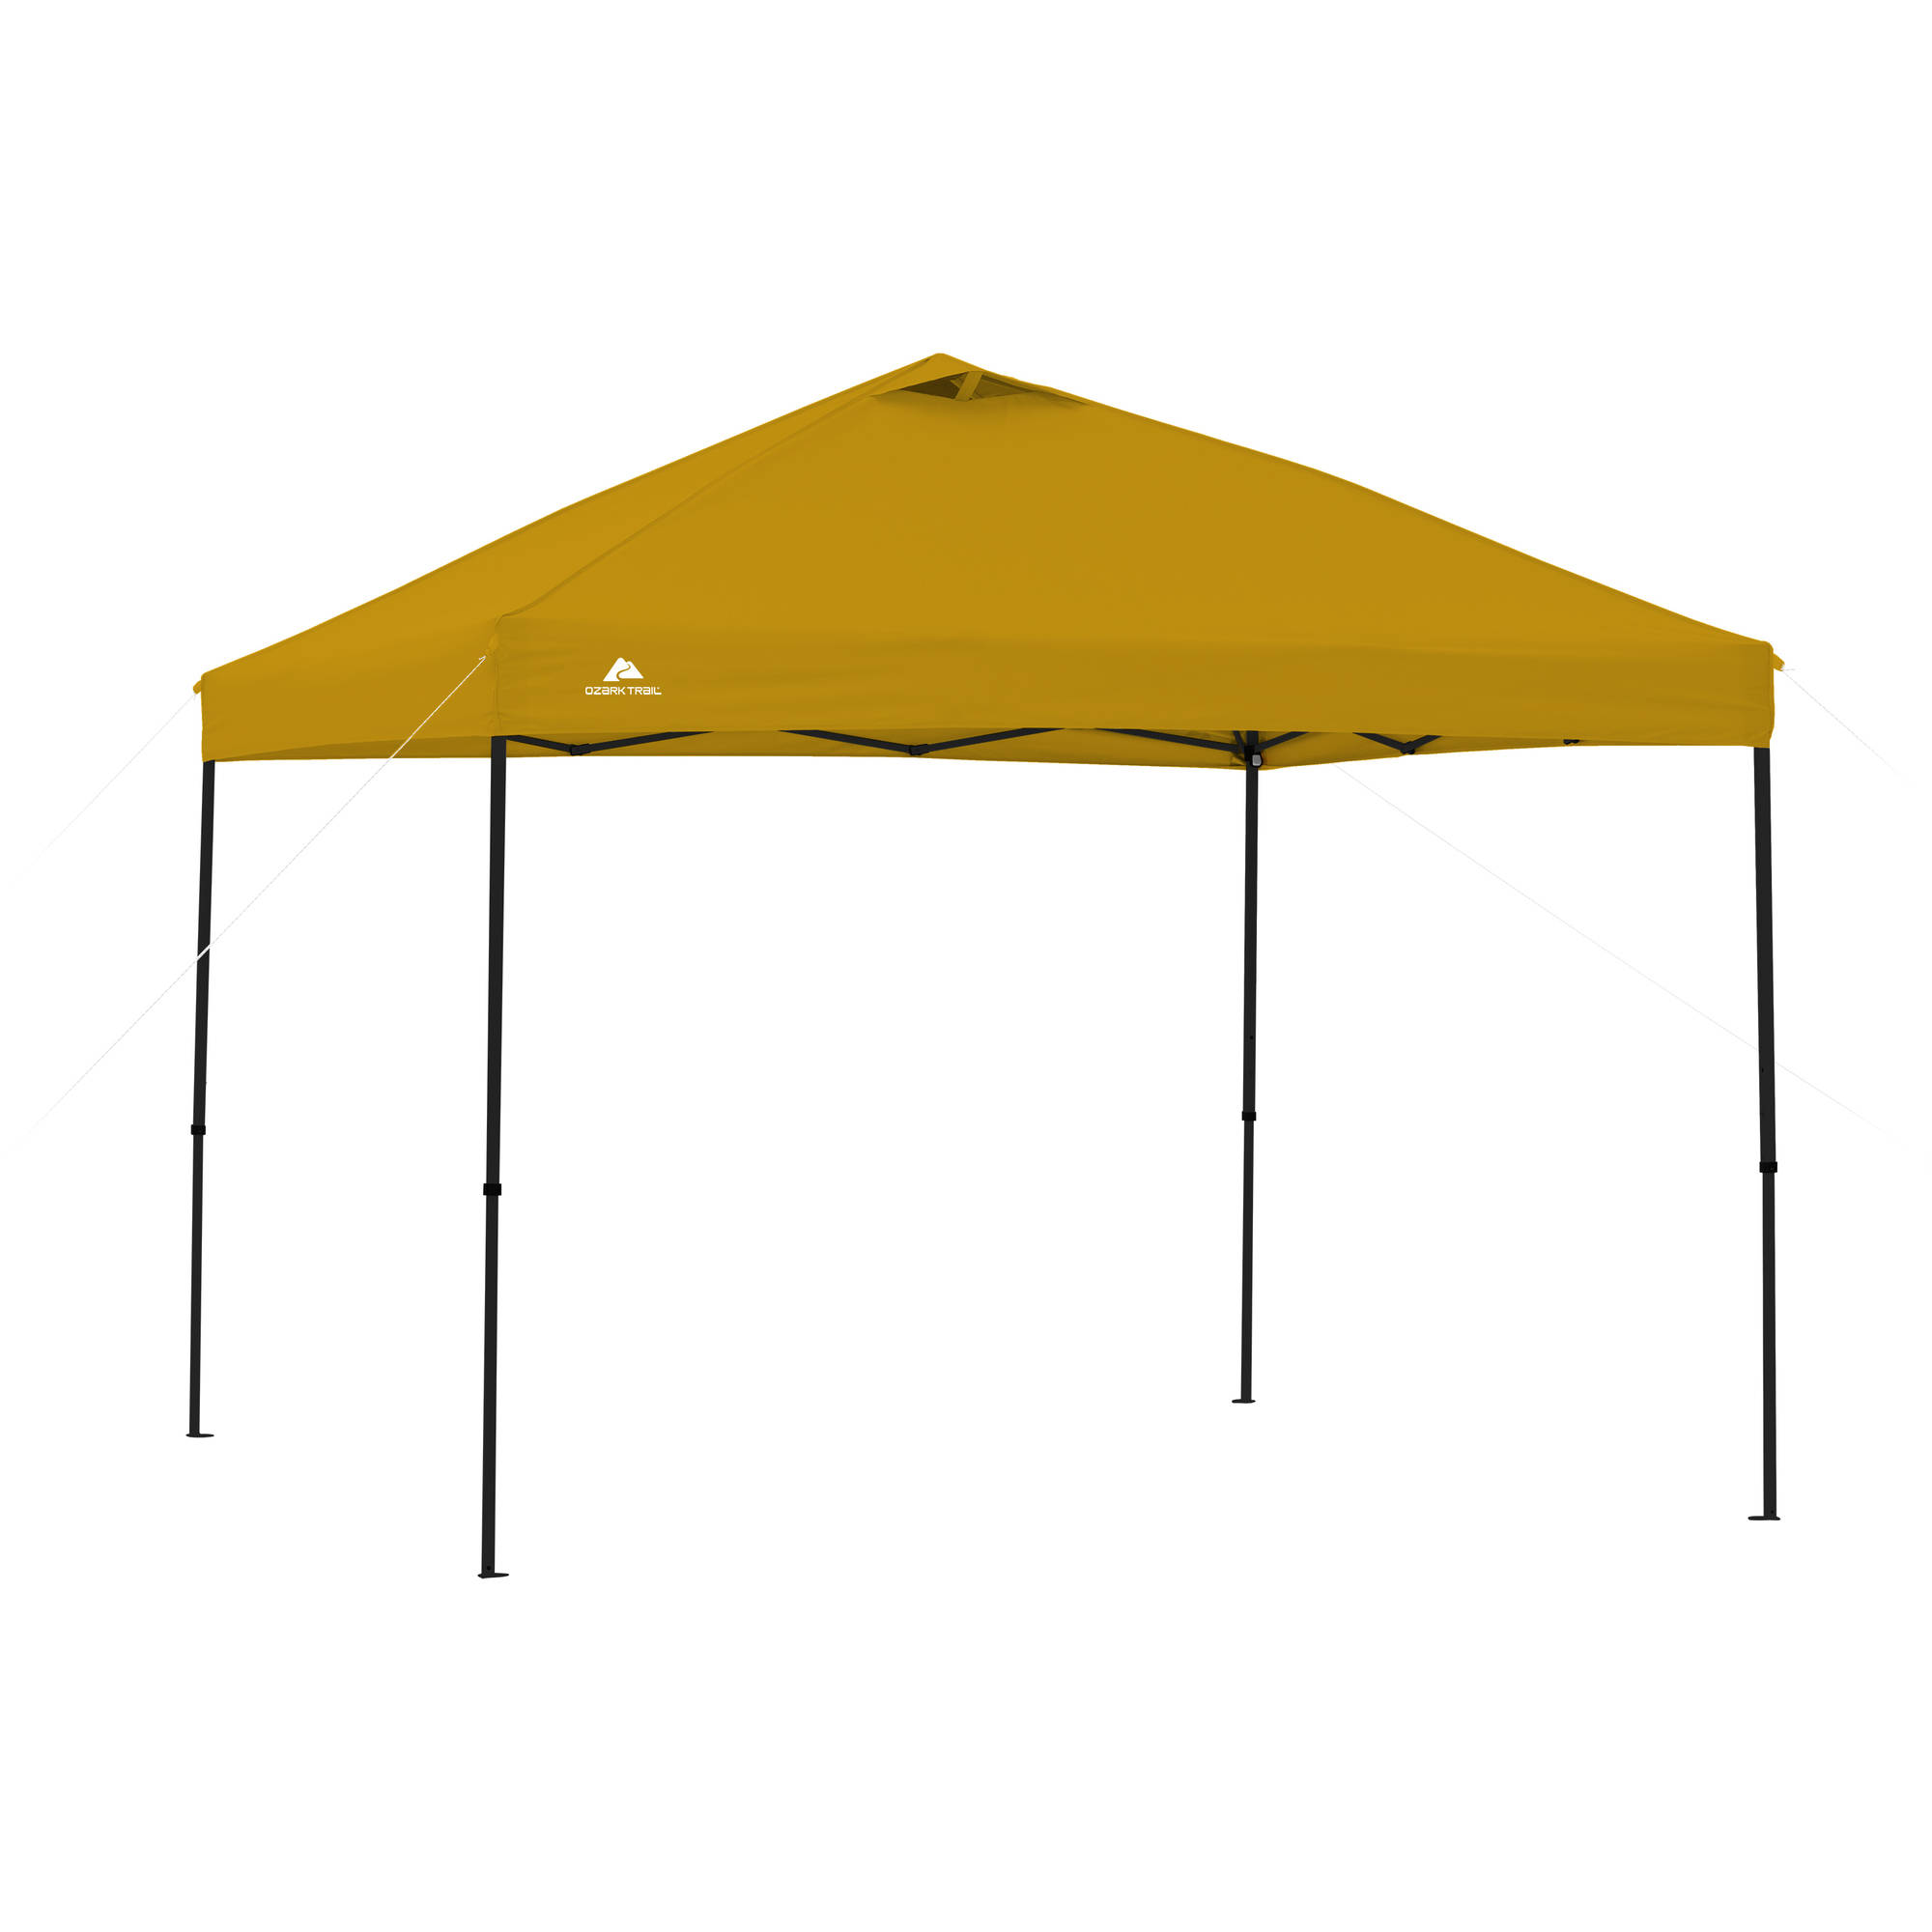 Ozark Trail 10' x 10' Yellow Instant Outdoor Canopy with UV Protection Material - image 1 of 5